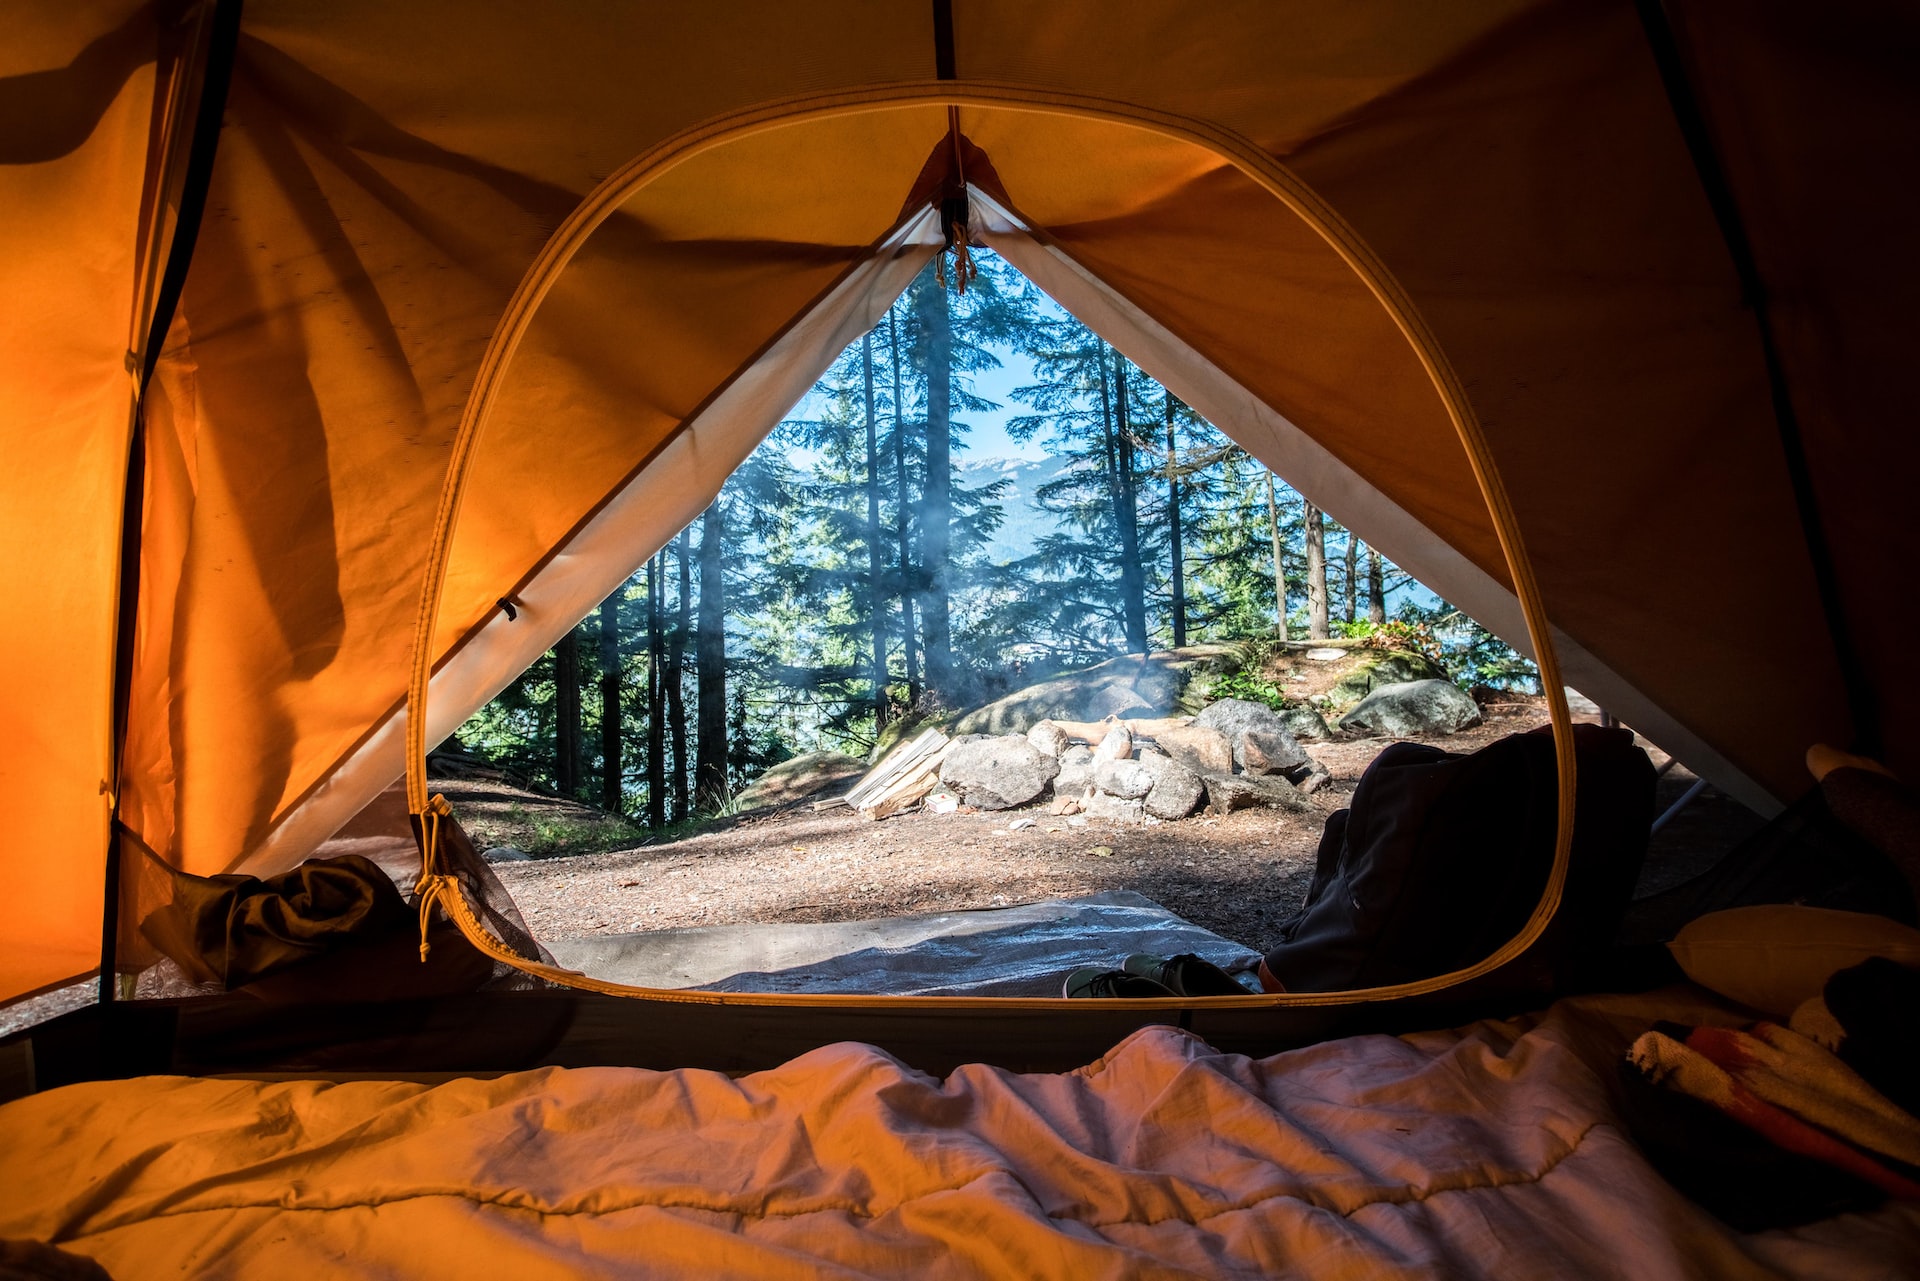 Featured Image for “Come Out Of The Tent”